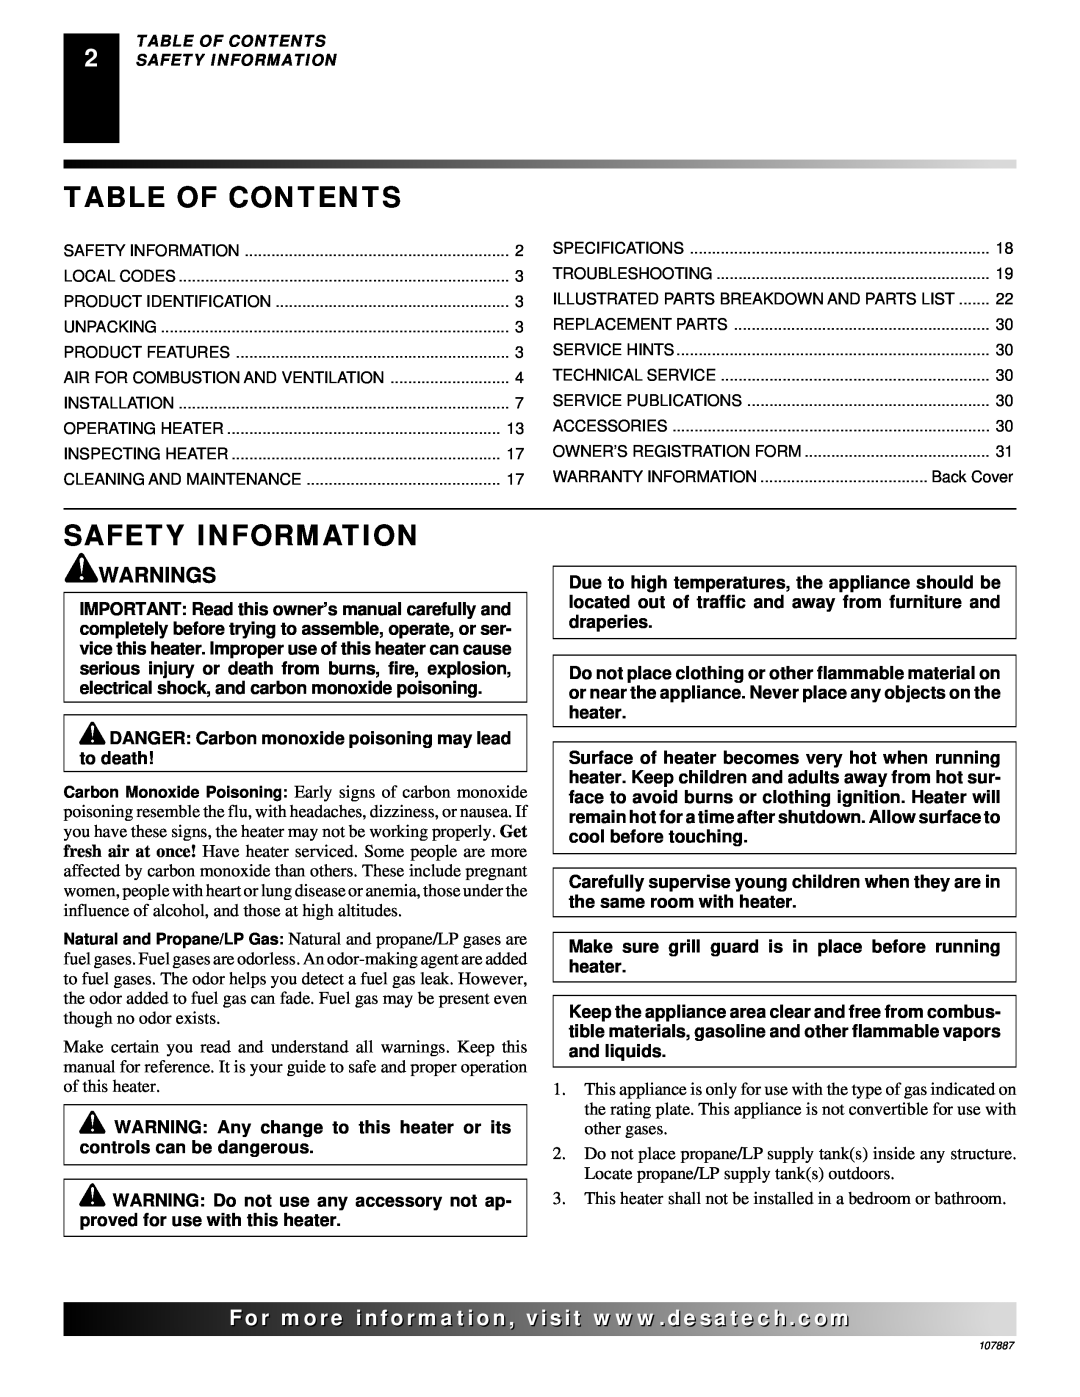 Vanguard Heating VP16T, VP26T, VN30T, VP22IT, VN18T, VN18IT, VP16IT, VN25IT Table Of Contents, Safety Information, Warnings 